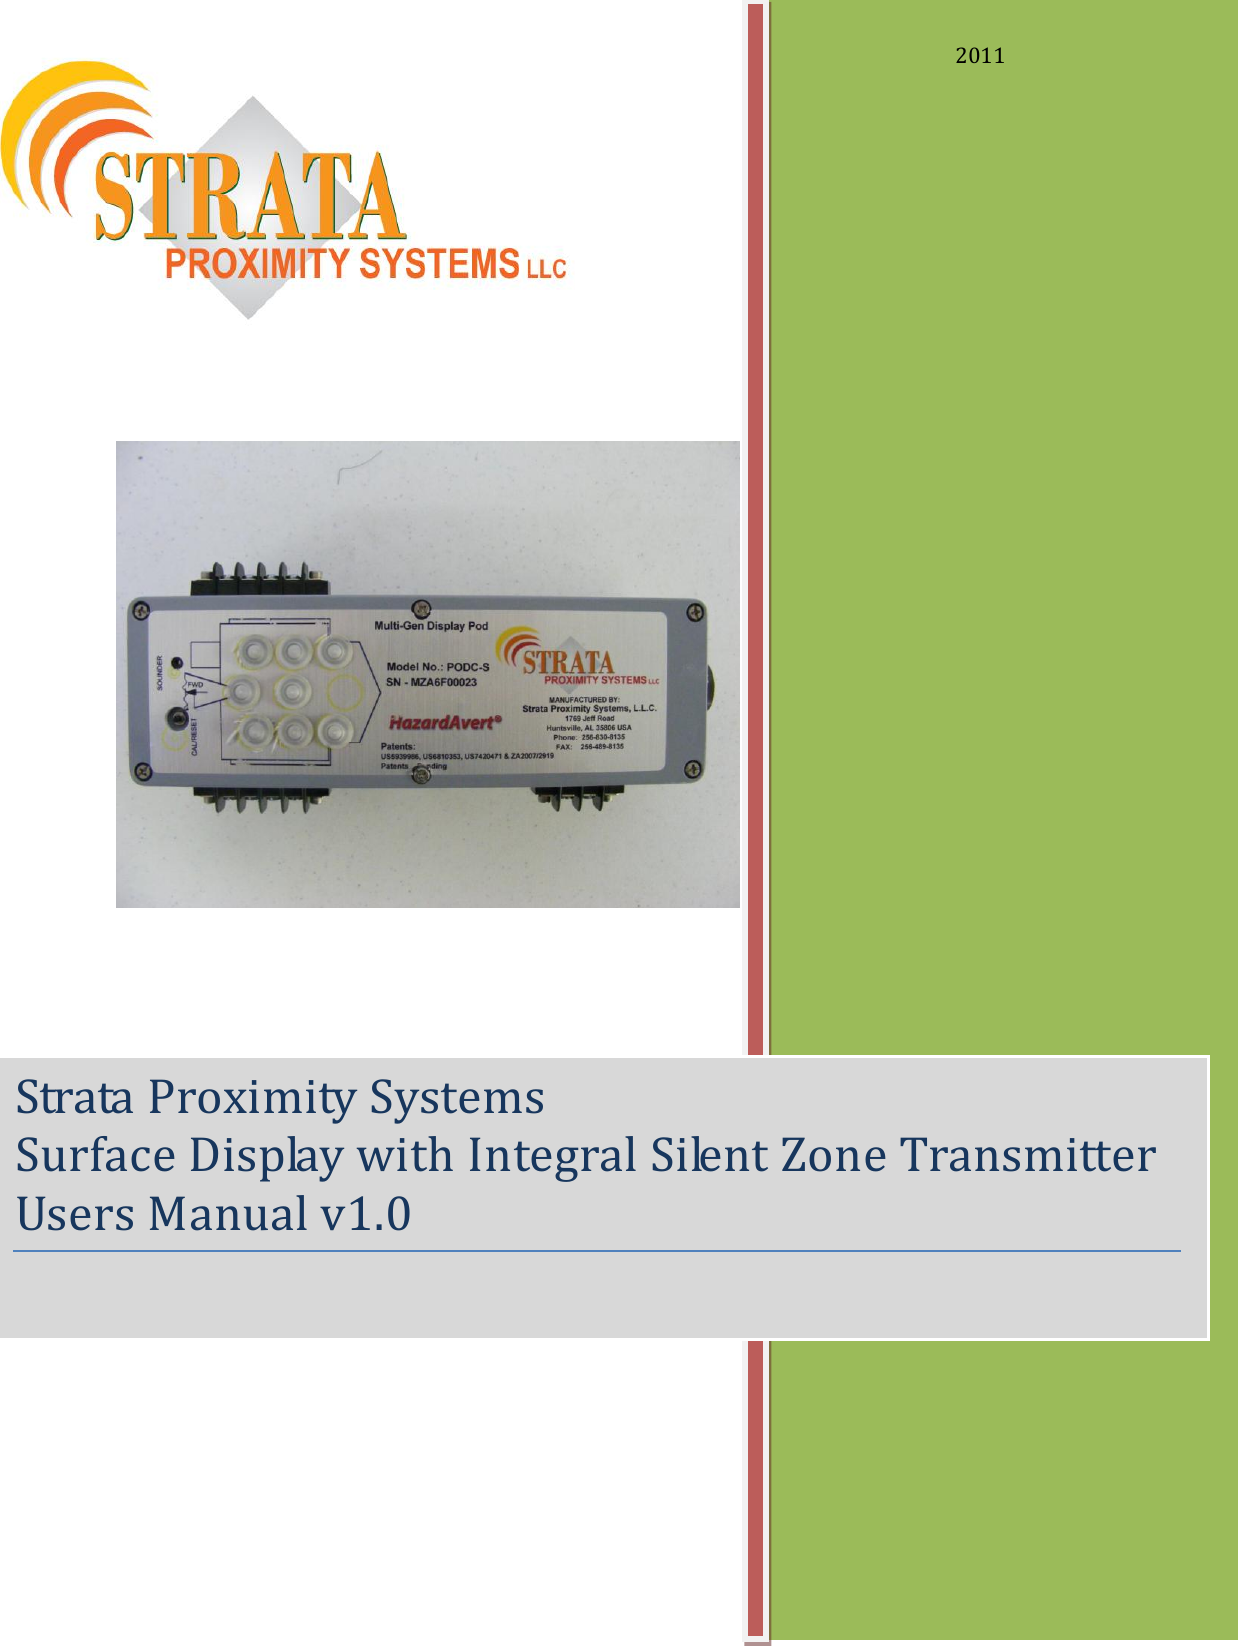                            Strata Proximity Systems Surface Display with Integral Silent Zone Transmitter    Users Manual v1.0   2011 